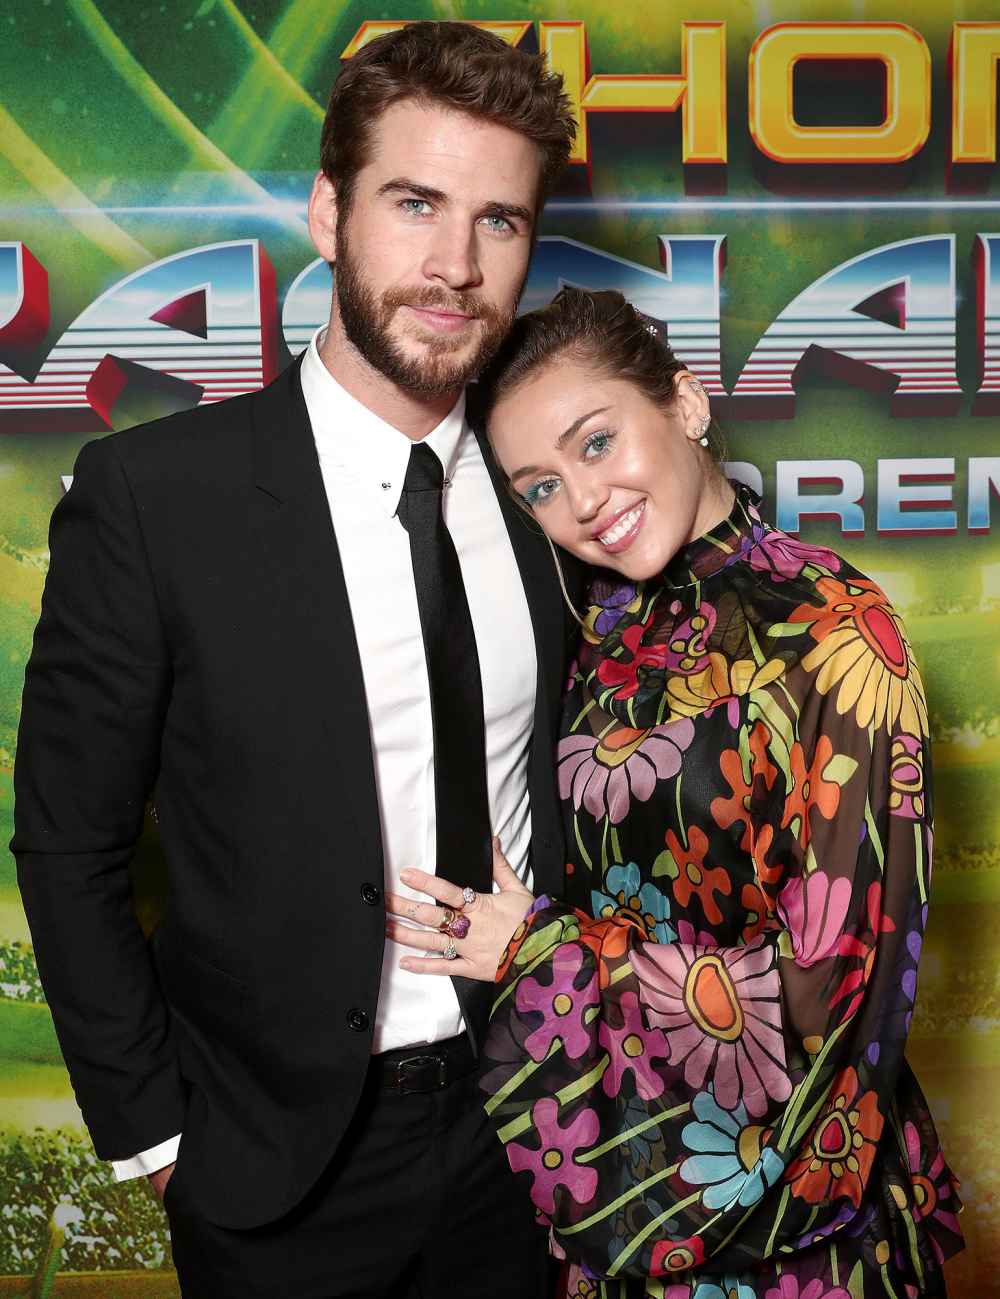 Liam Hemsworth Missed the 2019 Grammys After Being Hospitalized for Kidney Stones